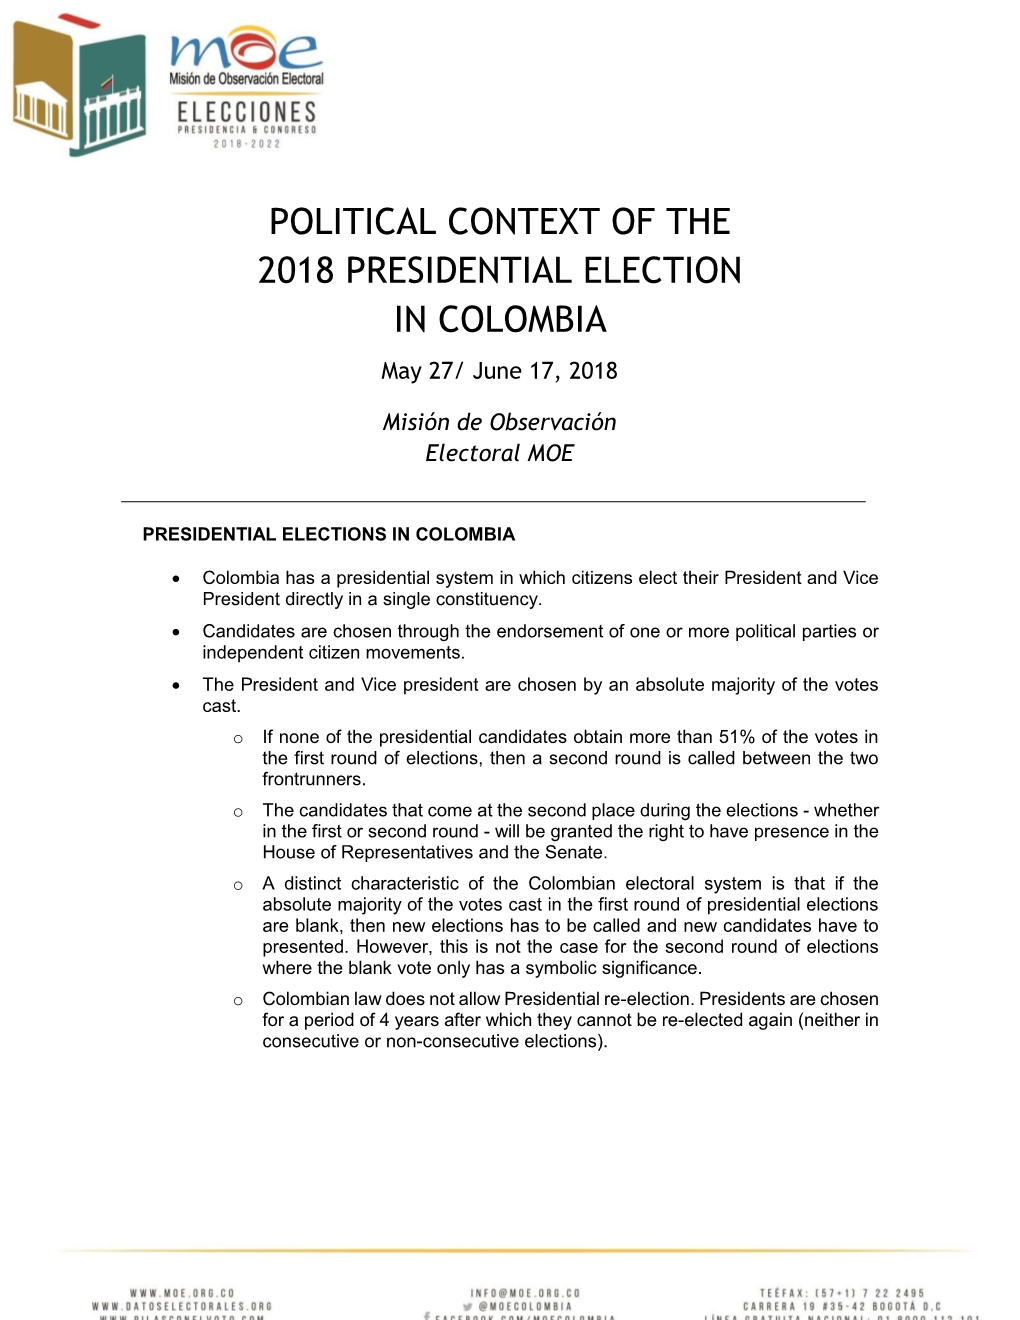 POLITICAL CONTEXT of the 2018 PRESIDENTIAL ELECTION in COLOMBIA May 27/ June 17, 2018